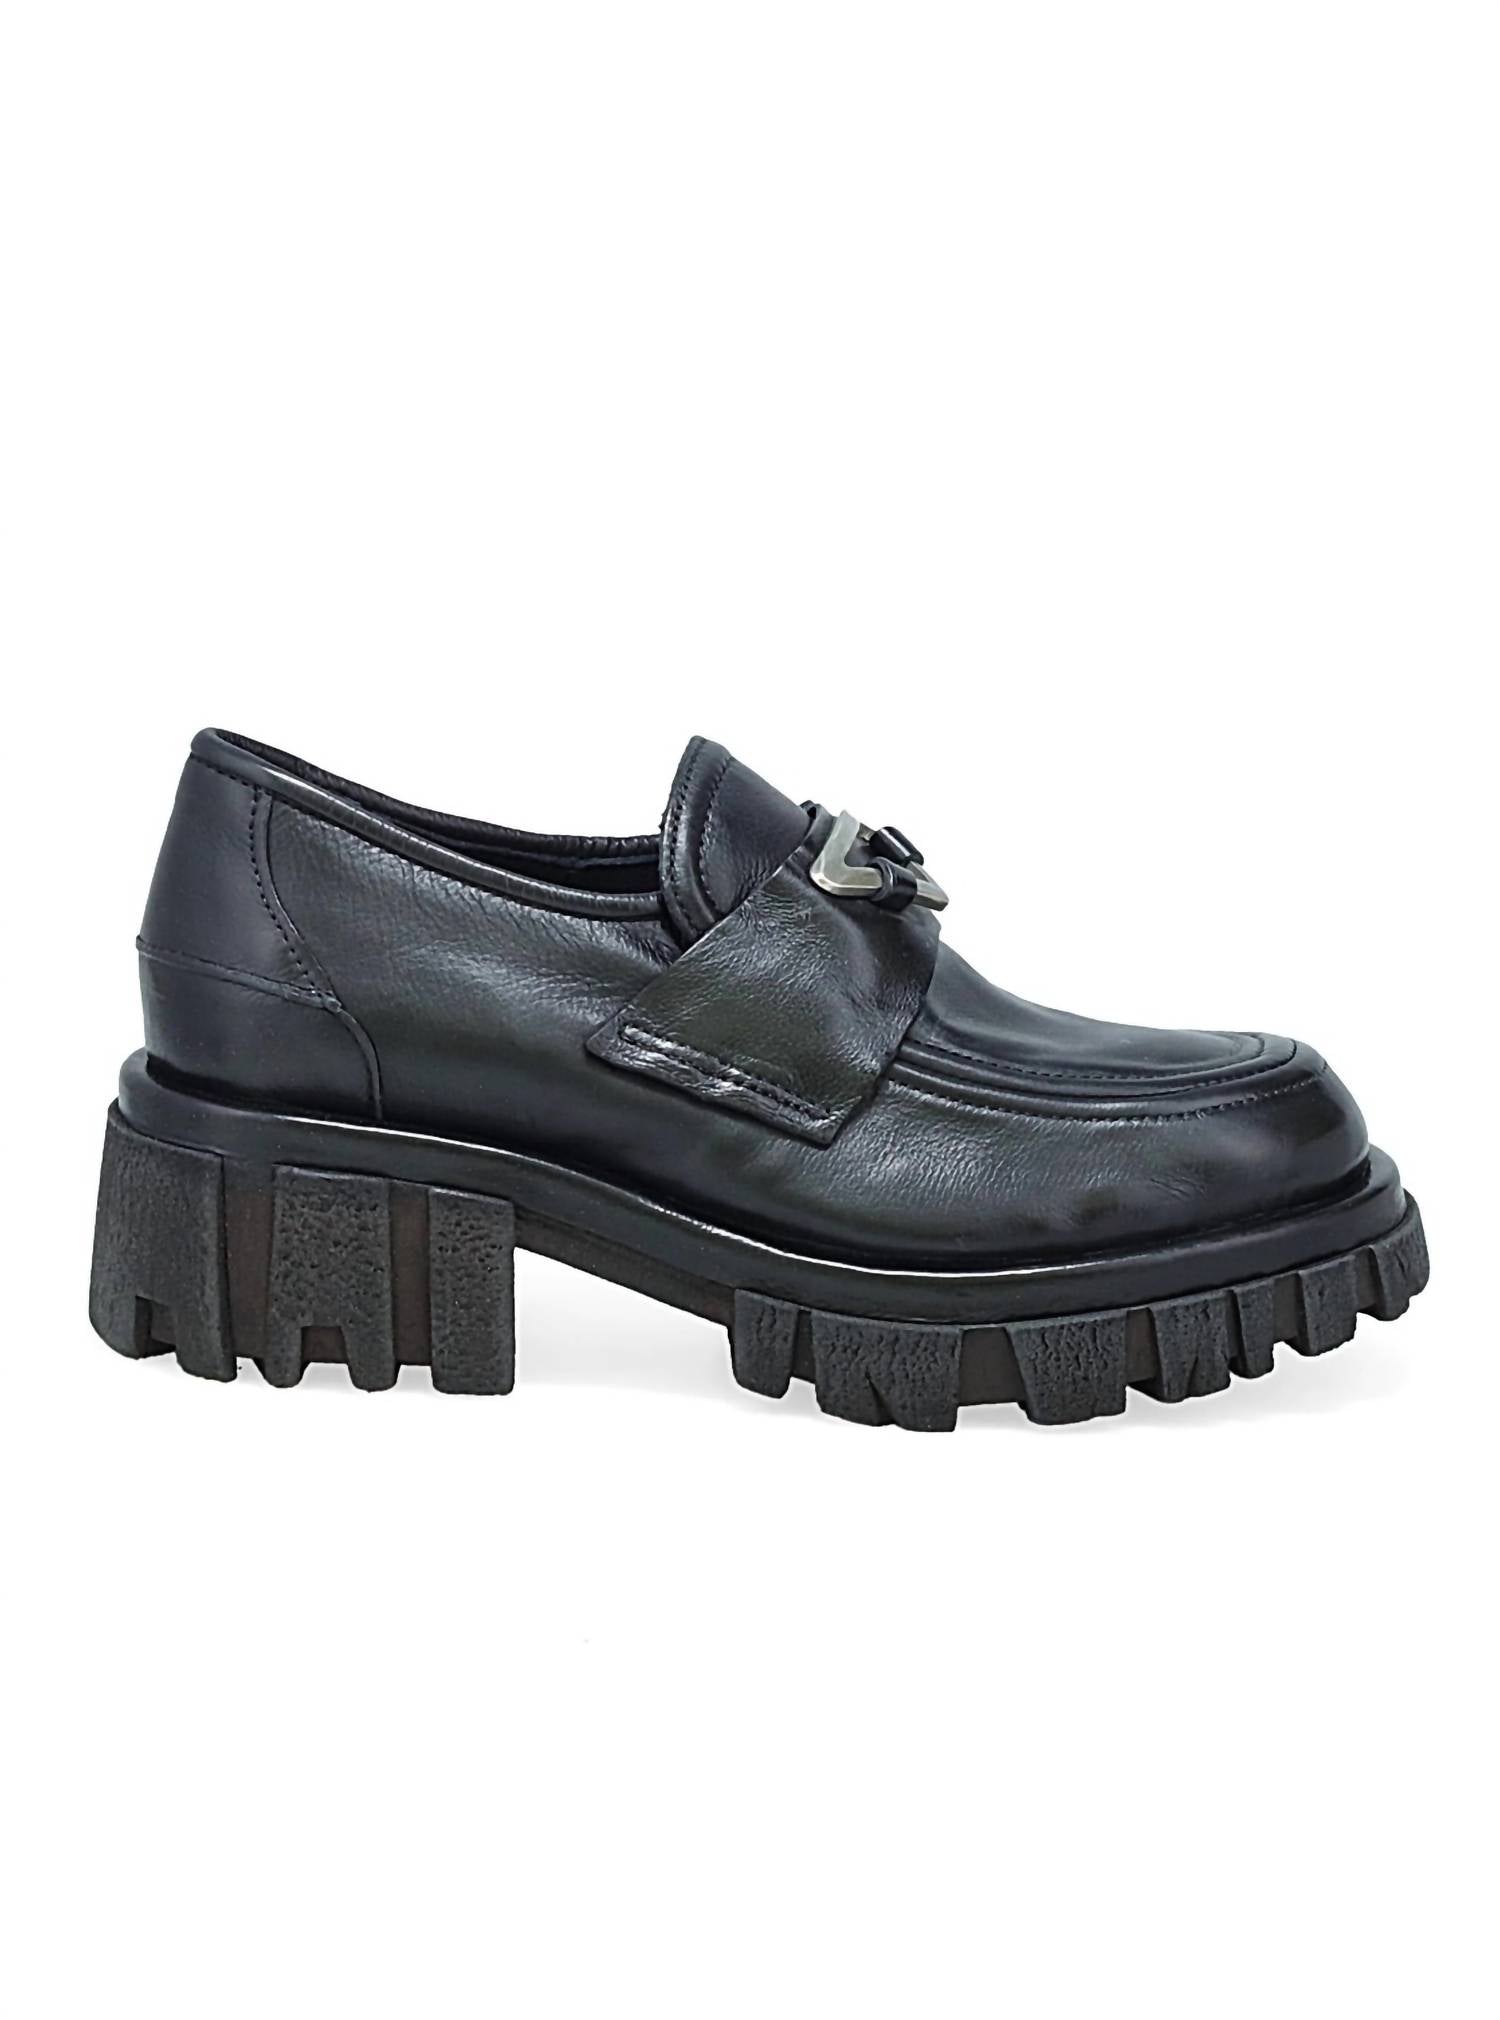 AS98 Harpie Oxford Loafer in Nero